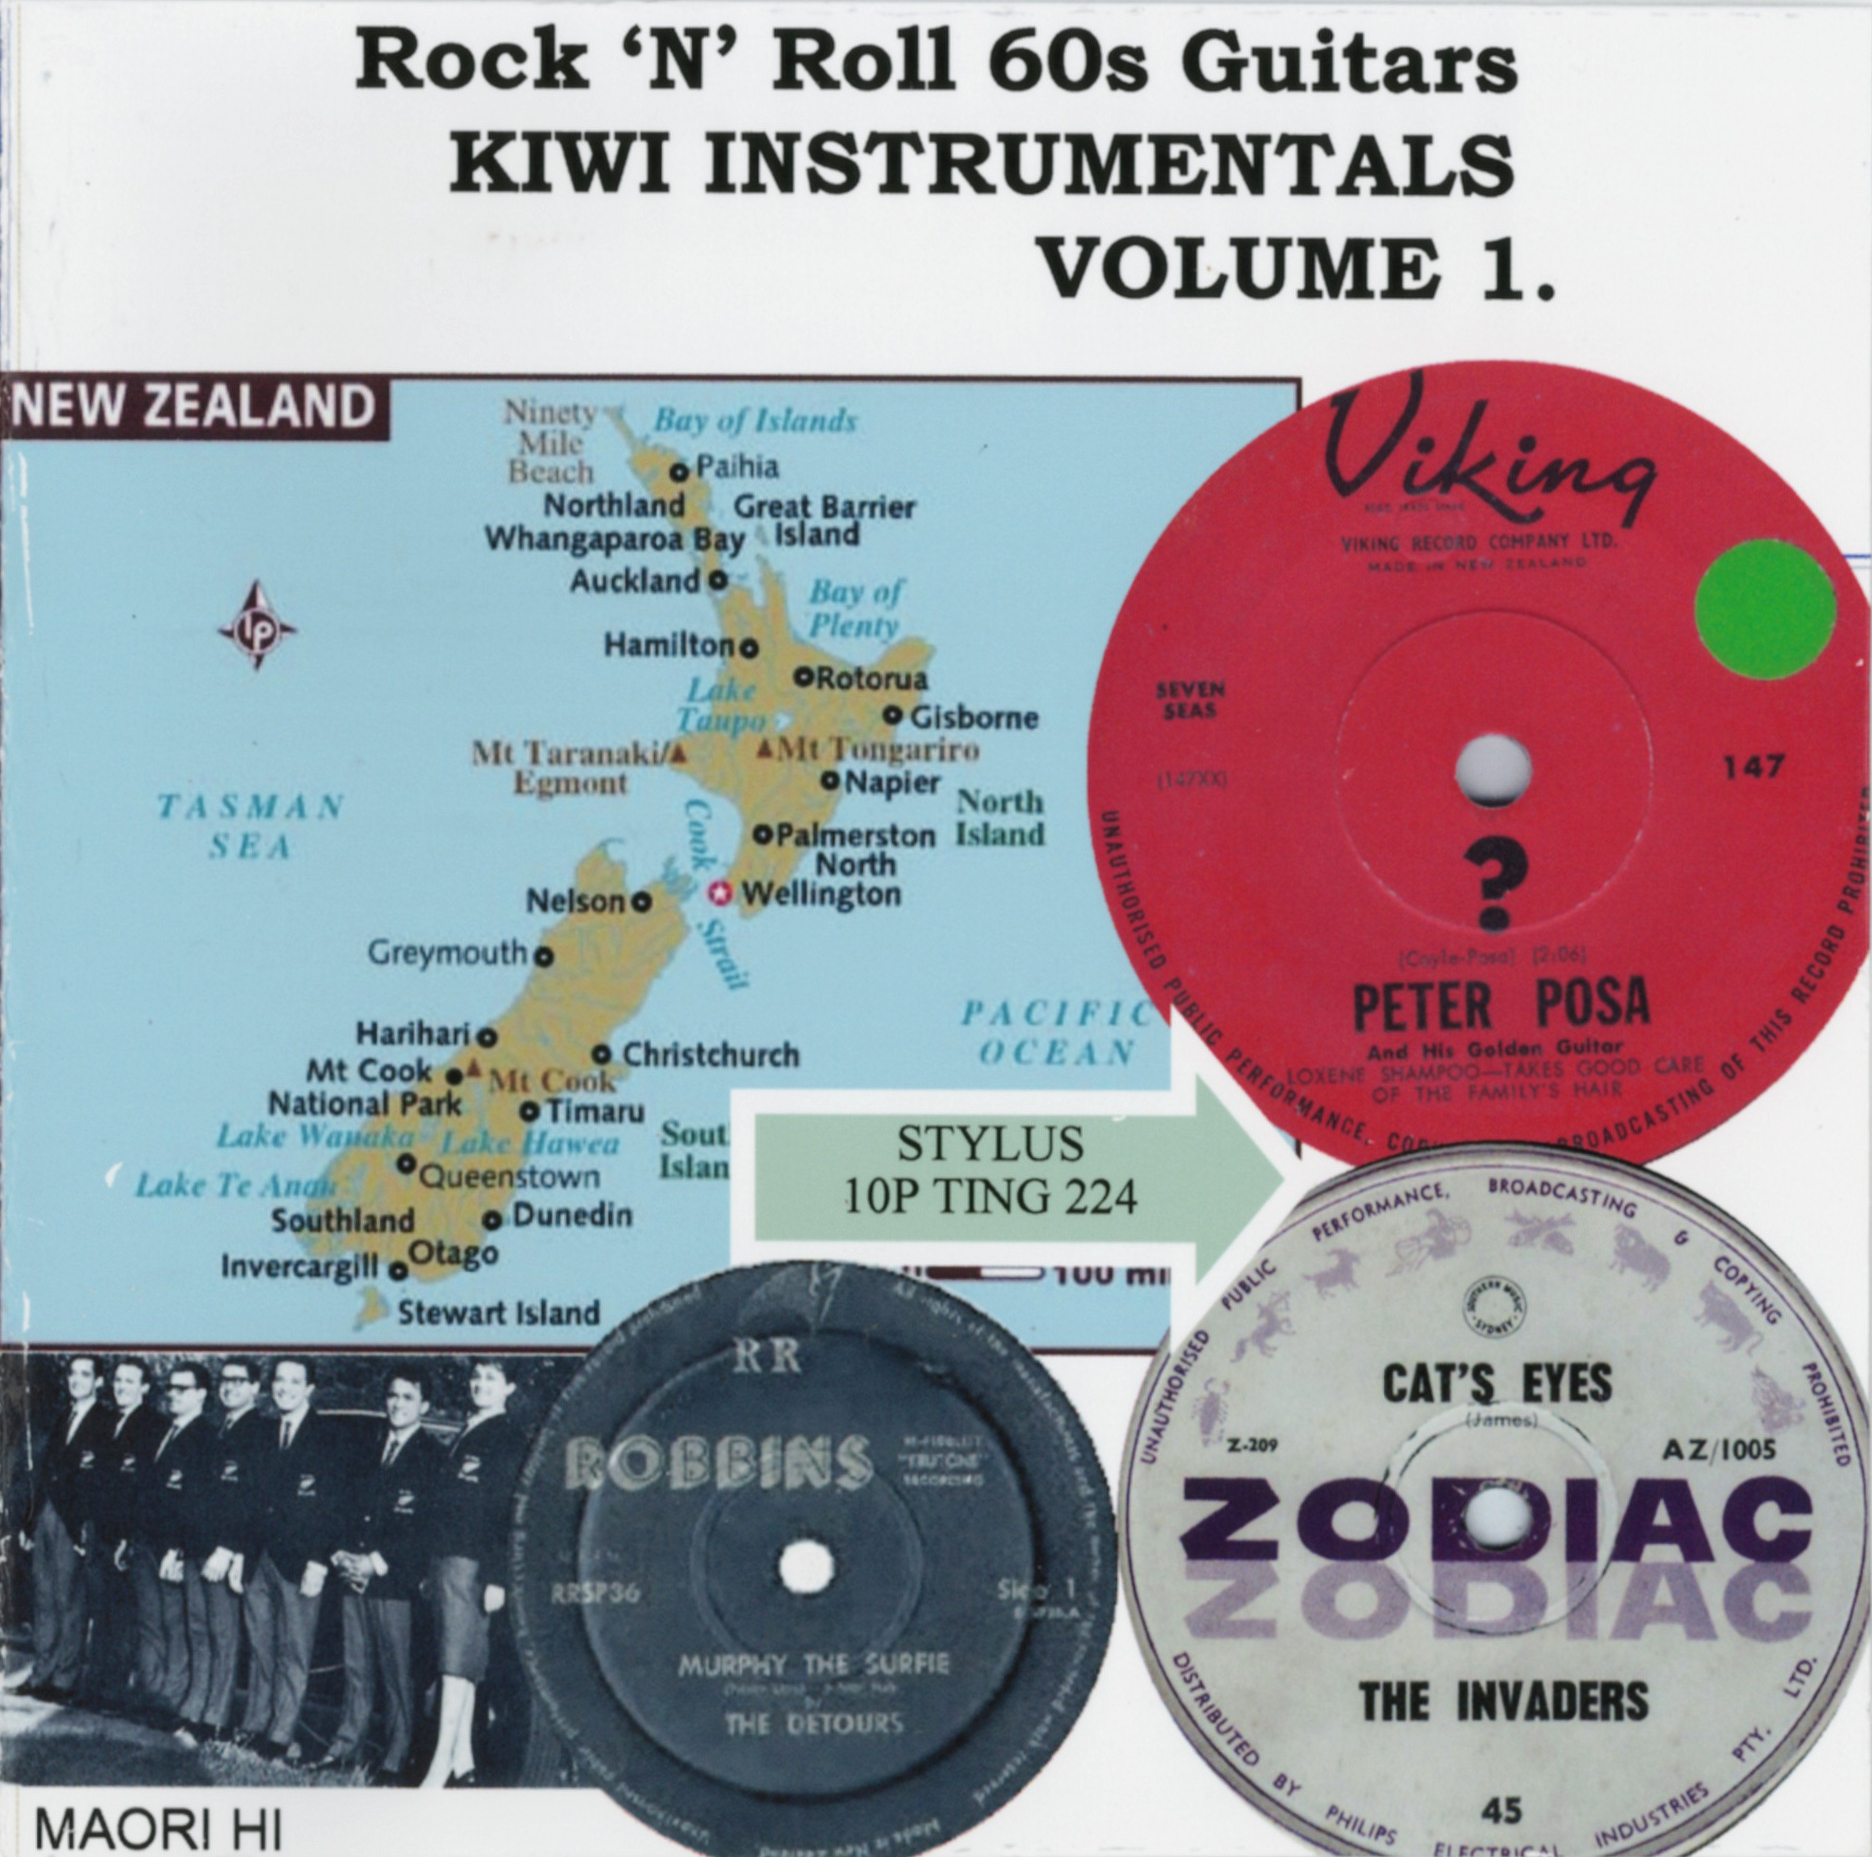 Stylus Records Rock'N'Roll 60s Guitars KIWI INSTRUMENTALS VOLUME 1 - Compilation 10P.TING 224 featuring "Murphy The Surfie" by The Detours